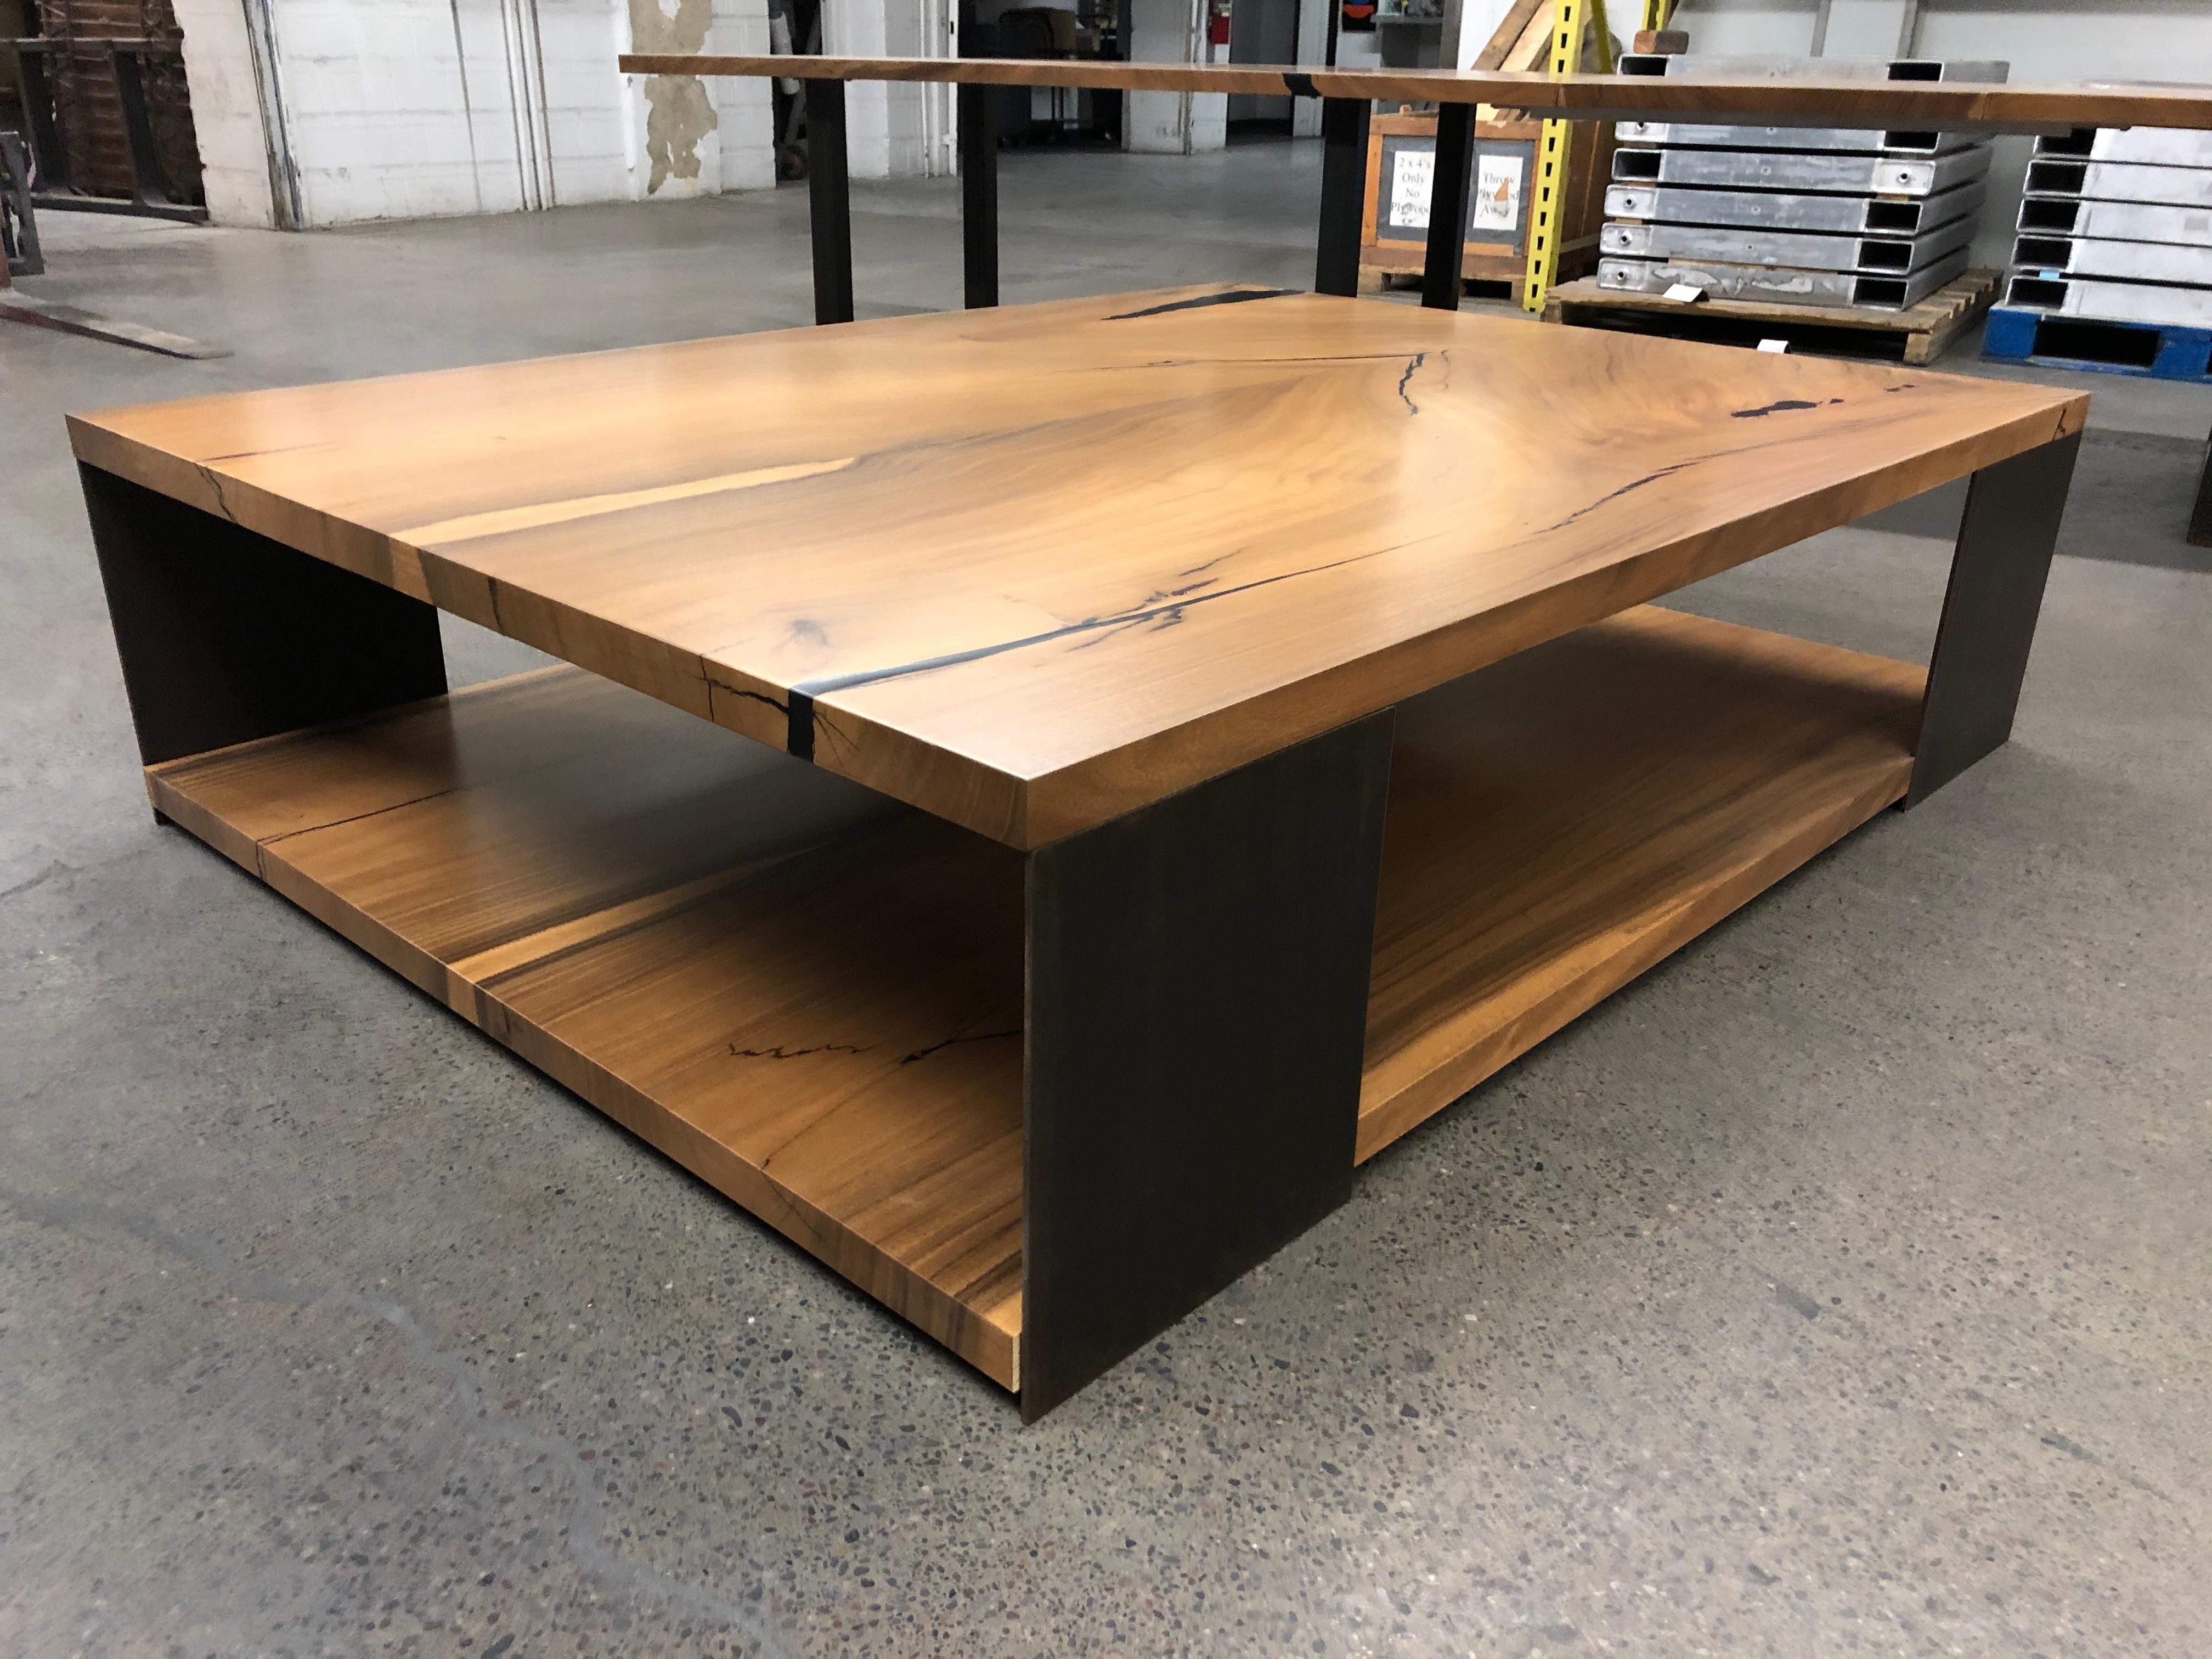 A two level monkeypod coffee table - each level is bookmached and the clean metal legs lock them sturdily in place for a pretty spectacular coffee table. 

The table in the image is long since sold to the client that custom ordered it. You would be